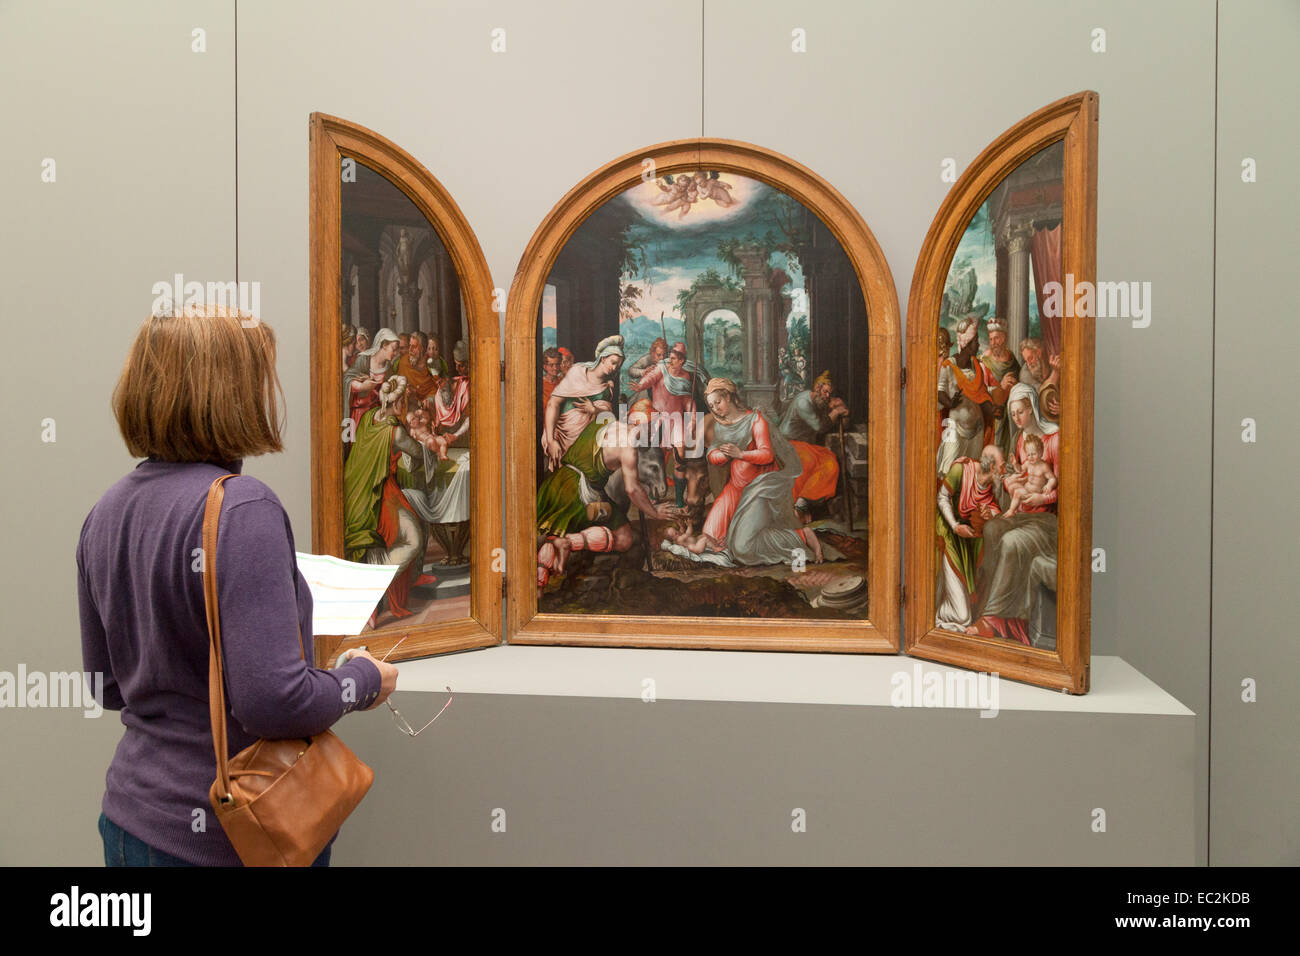 A woman looking at a 16th century Flemish painting by Frans Floris;  the Groeninge Museum, Bruges Belgium, Europe Stock Photo